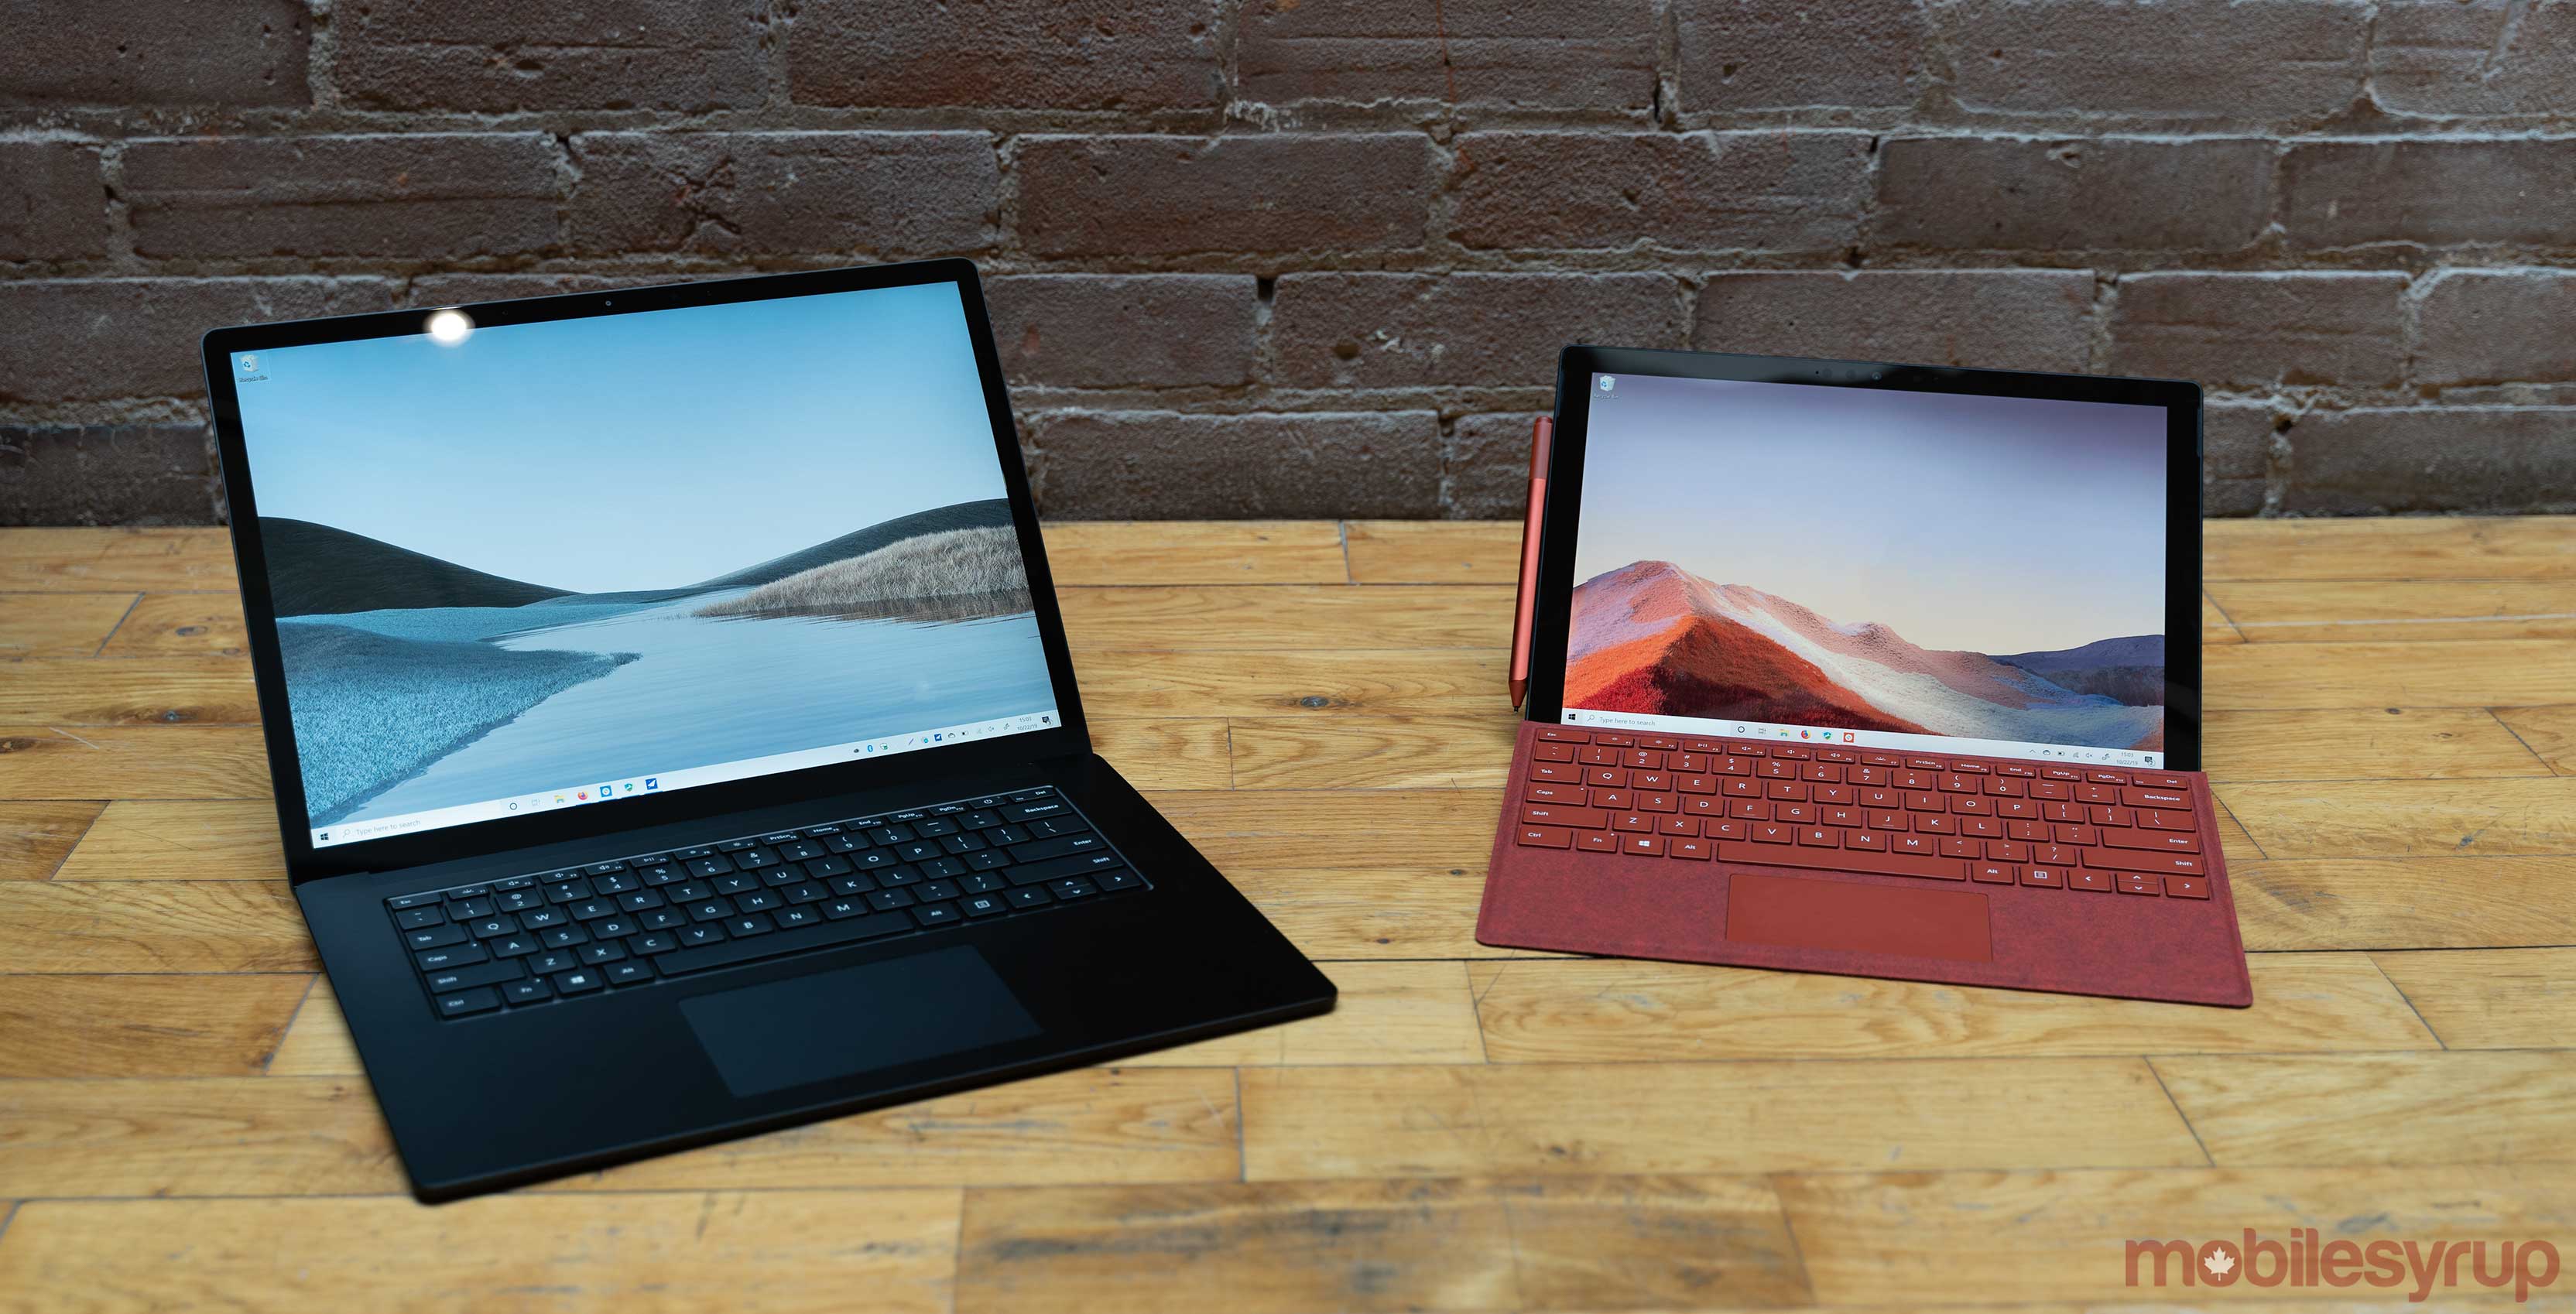 Microsoft S Surface Laptop 3 And Pro 7 Are Now Available In Canada